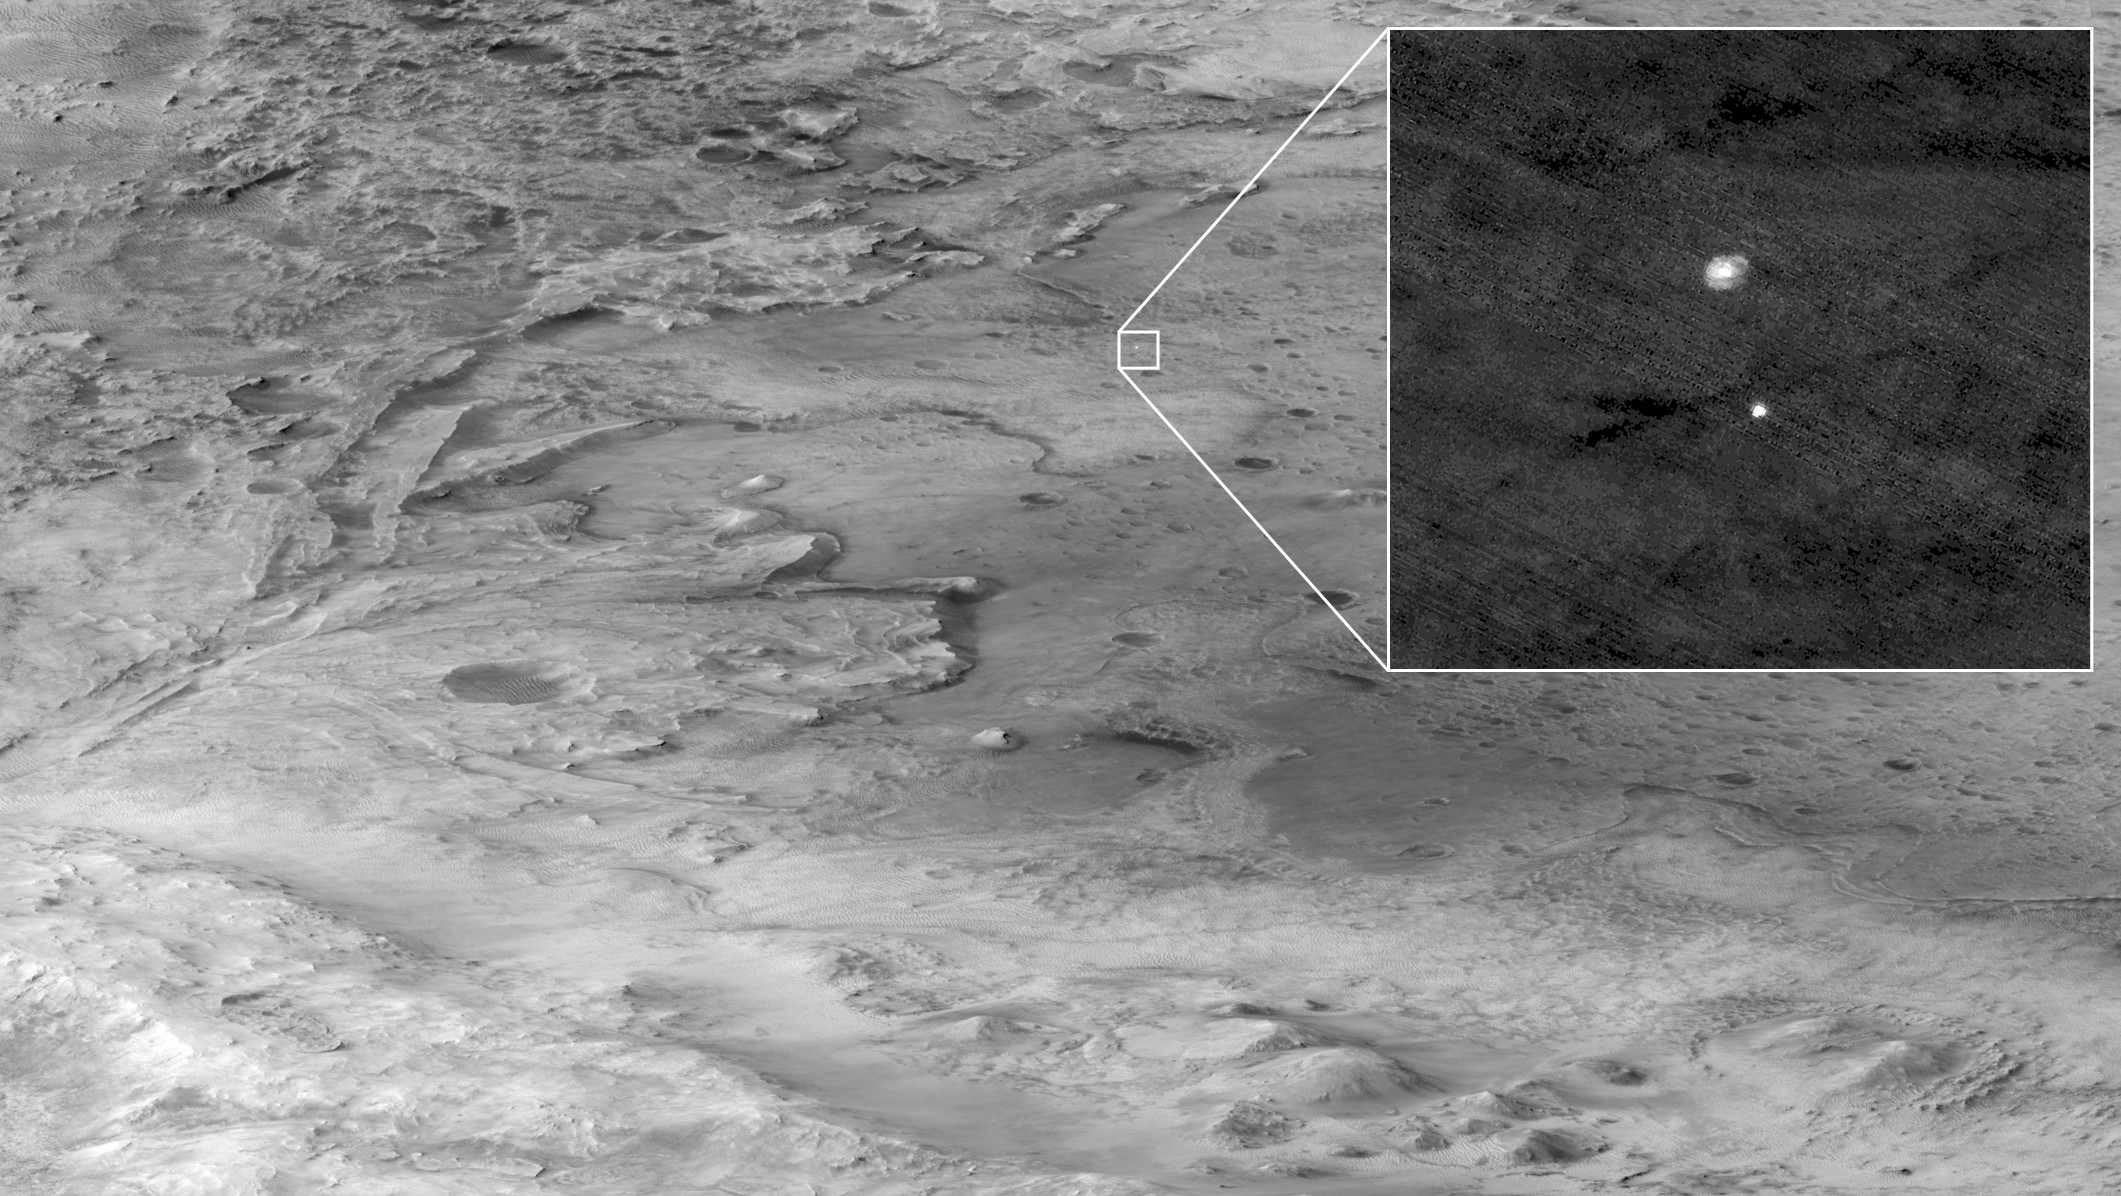 Photo taken from 700km away by the Mars reconnaissance Orbiter of the Perseverance rover descending under its parachute.